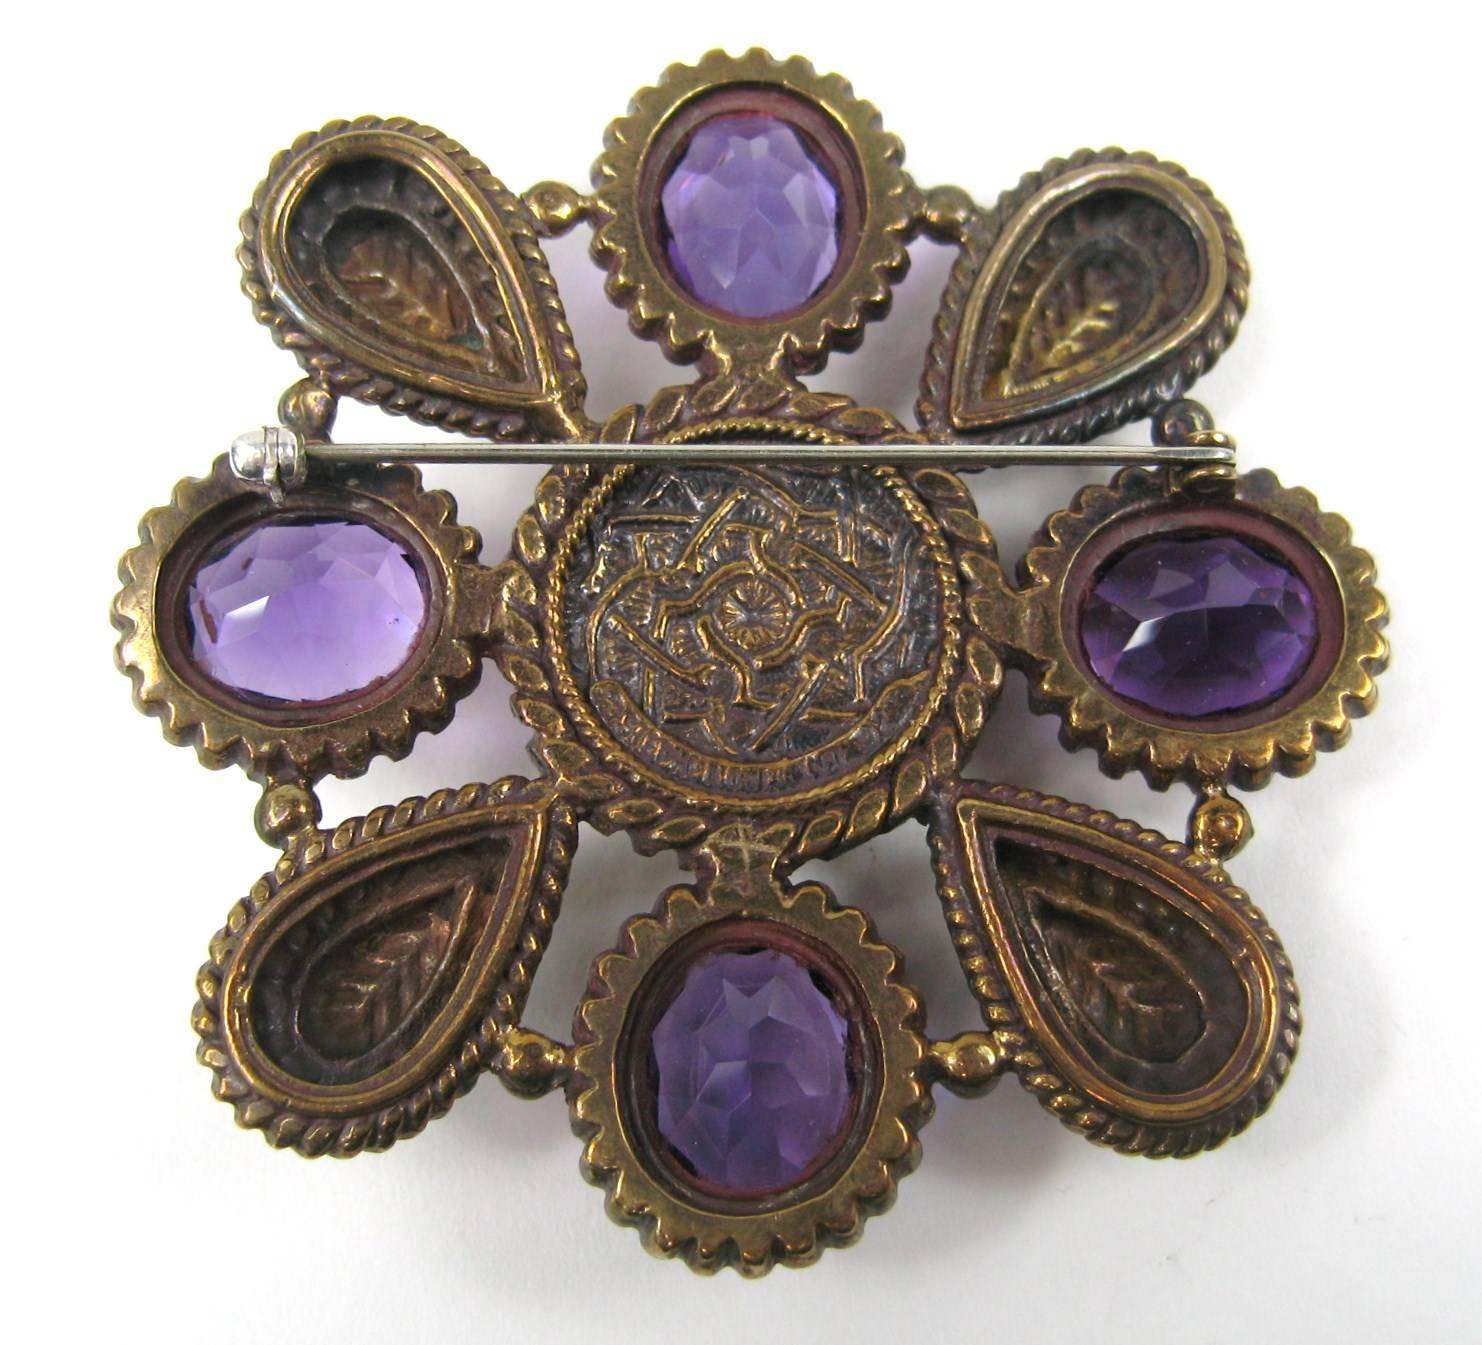 Stephen Dweck Bronze Amethyst Brooch Pin New Old Stock. Circa late 80s early 90s. Measures 2.43 in wide x 2.43 top to bottom.  Visit our store front for hundreds of designer costume jewelry as well as sterling silver. Be sure to follow us to get